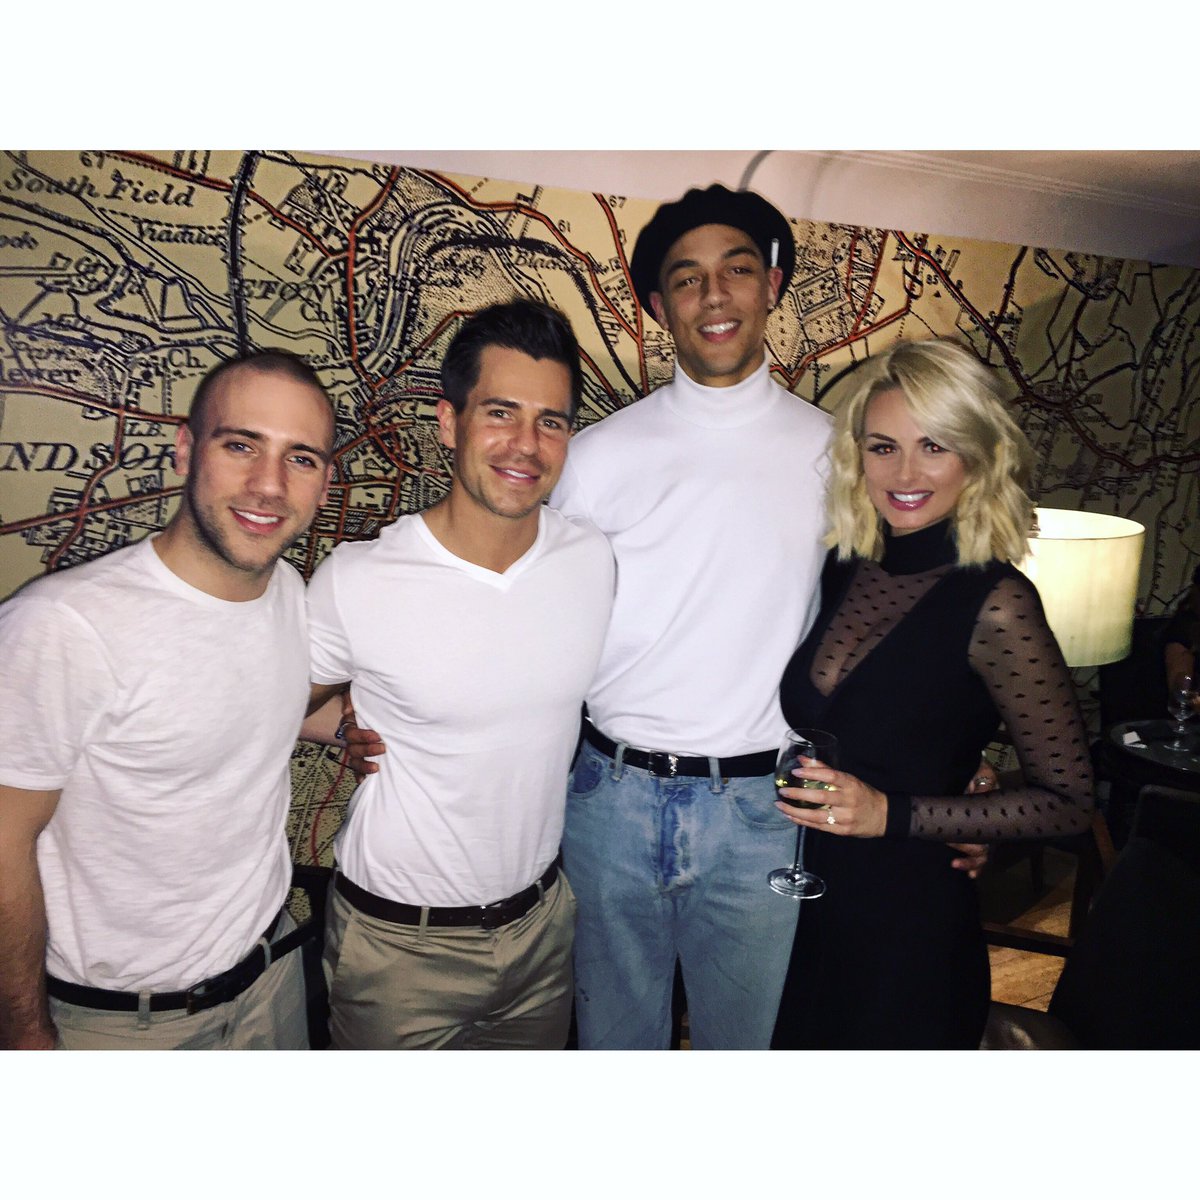 Amaze night with these eggs! ❤ @olivermellor @Jimmy_Essex @Charlesmusic #OutOut https://t.co/icBTRt5TKU